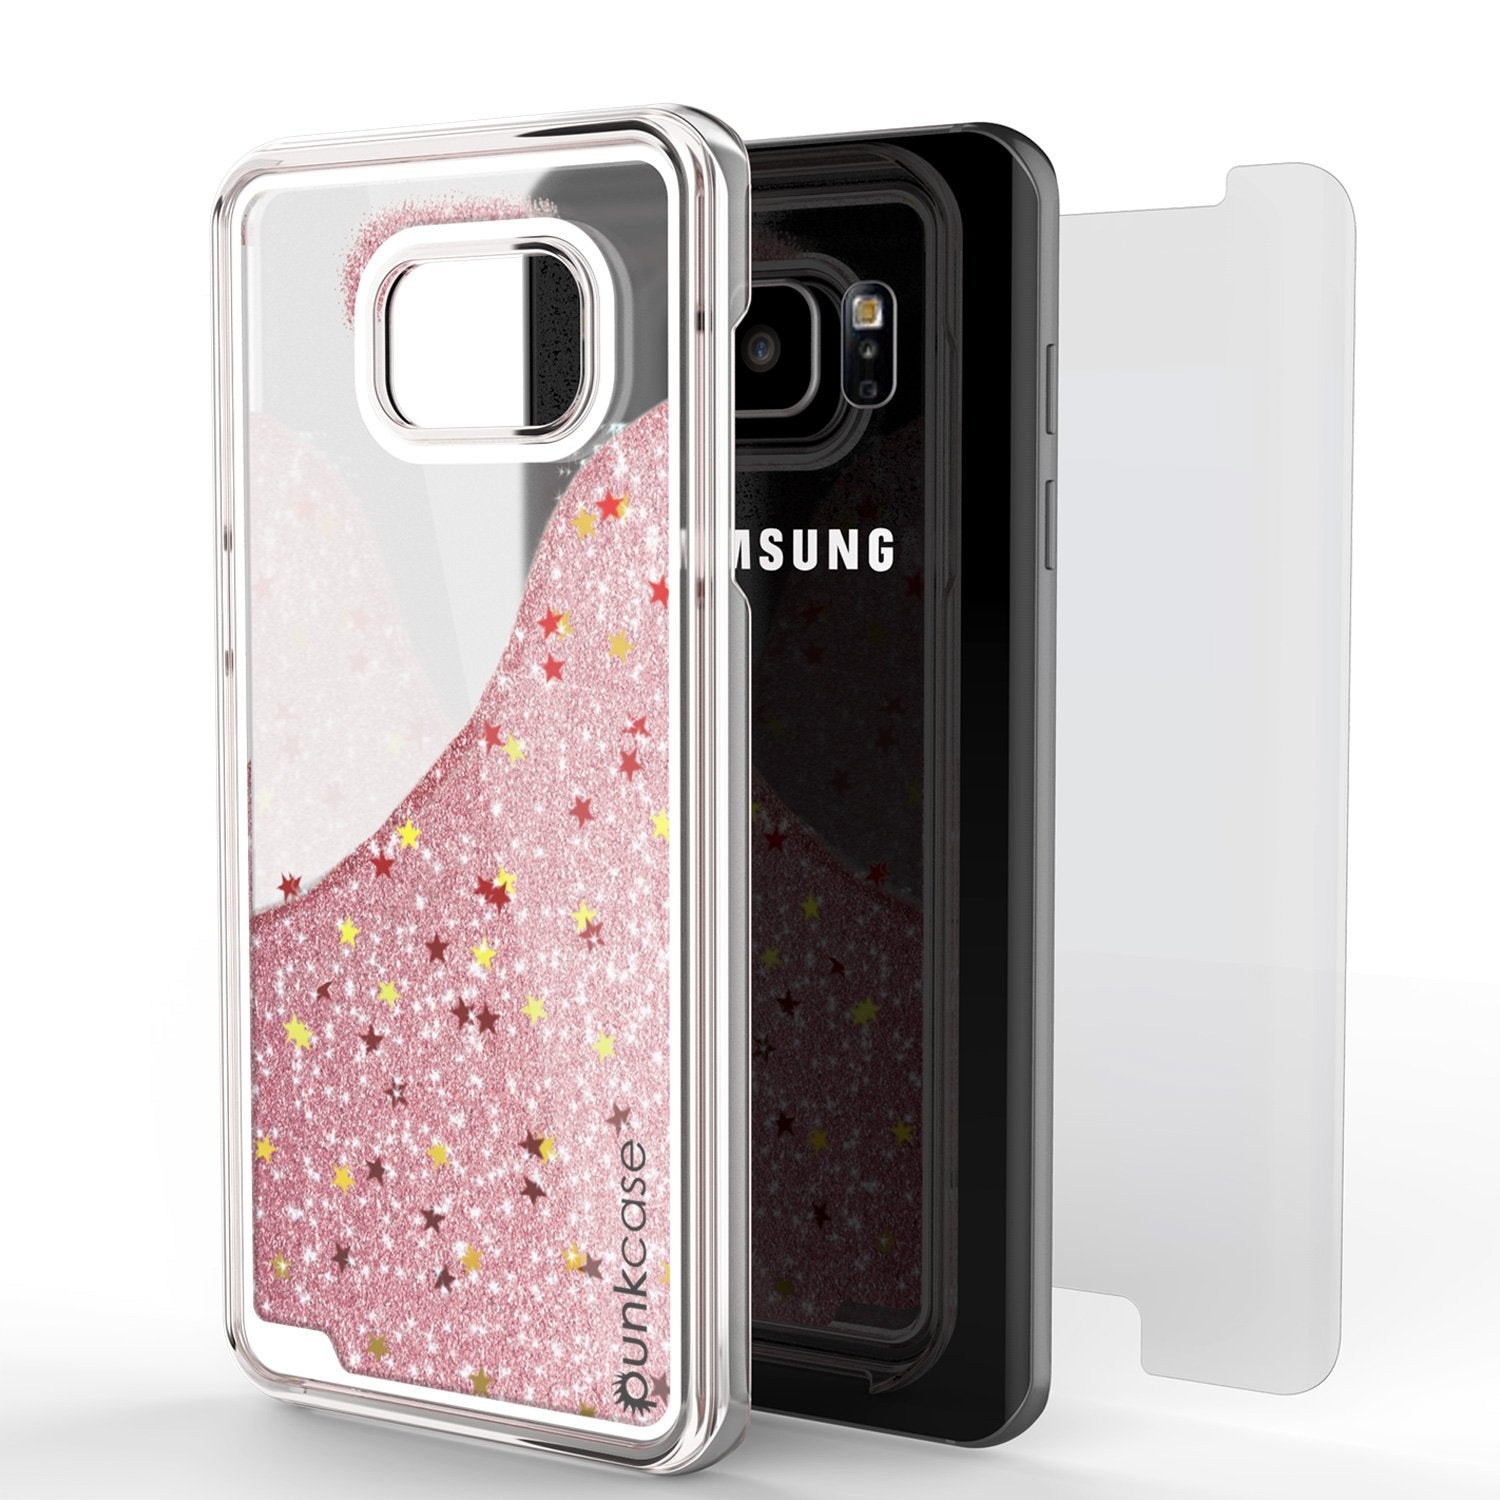 S7 Edge Case, Punkcase [Liquid Rose Series] Protective Dual Layer Floating Glitter Cover with lots of Bling & Sparkle + PunkShield Screen Protector